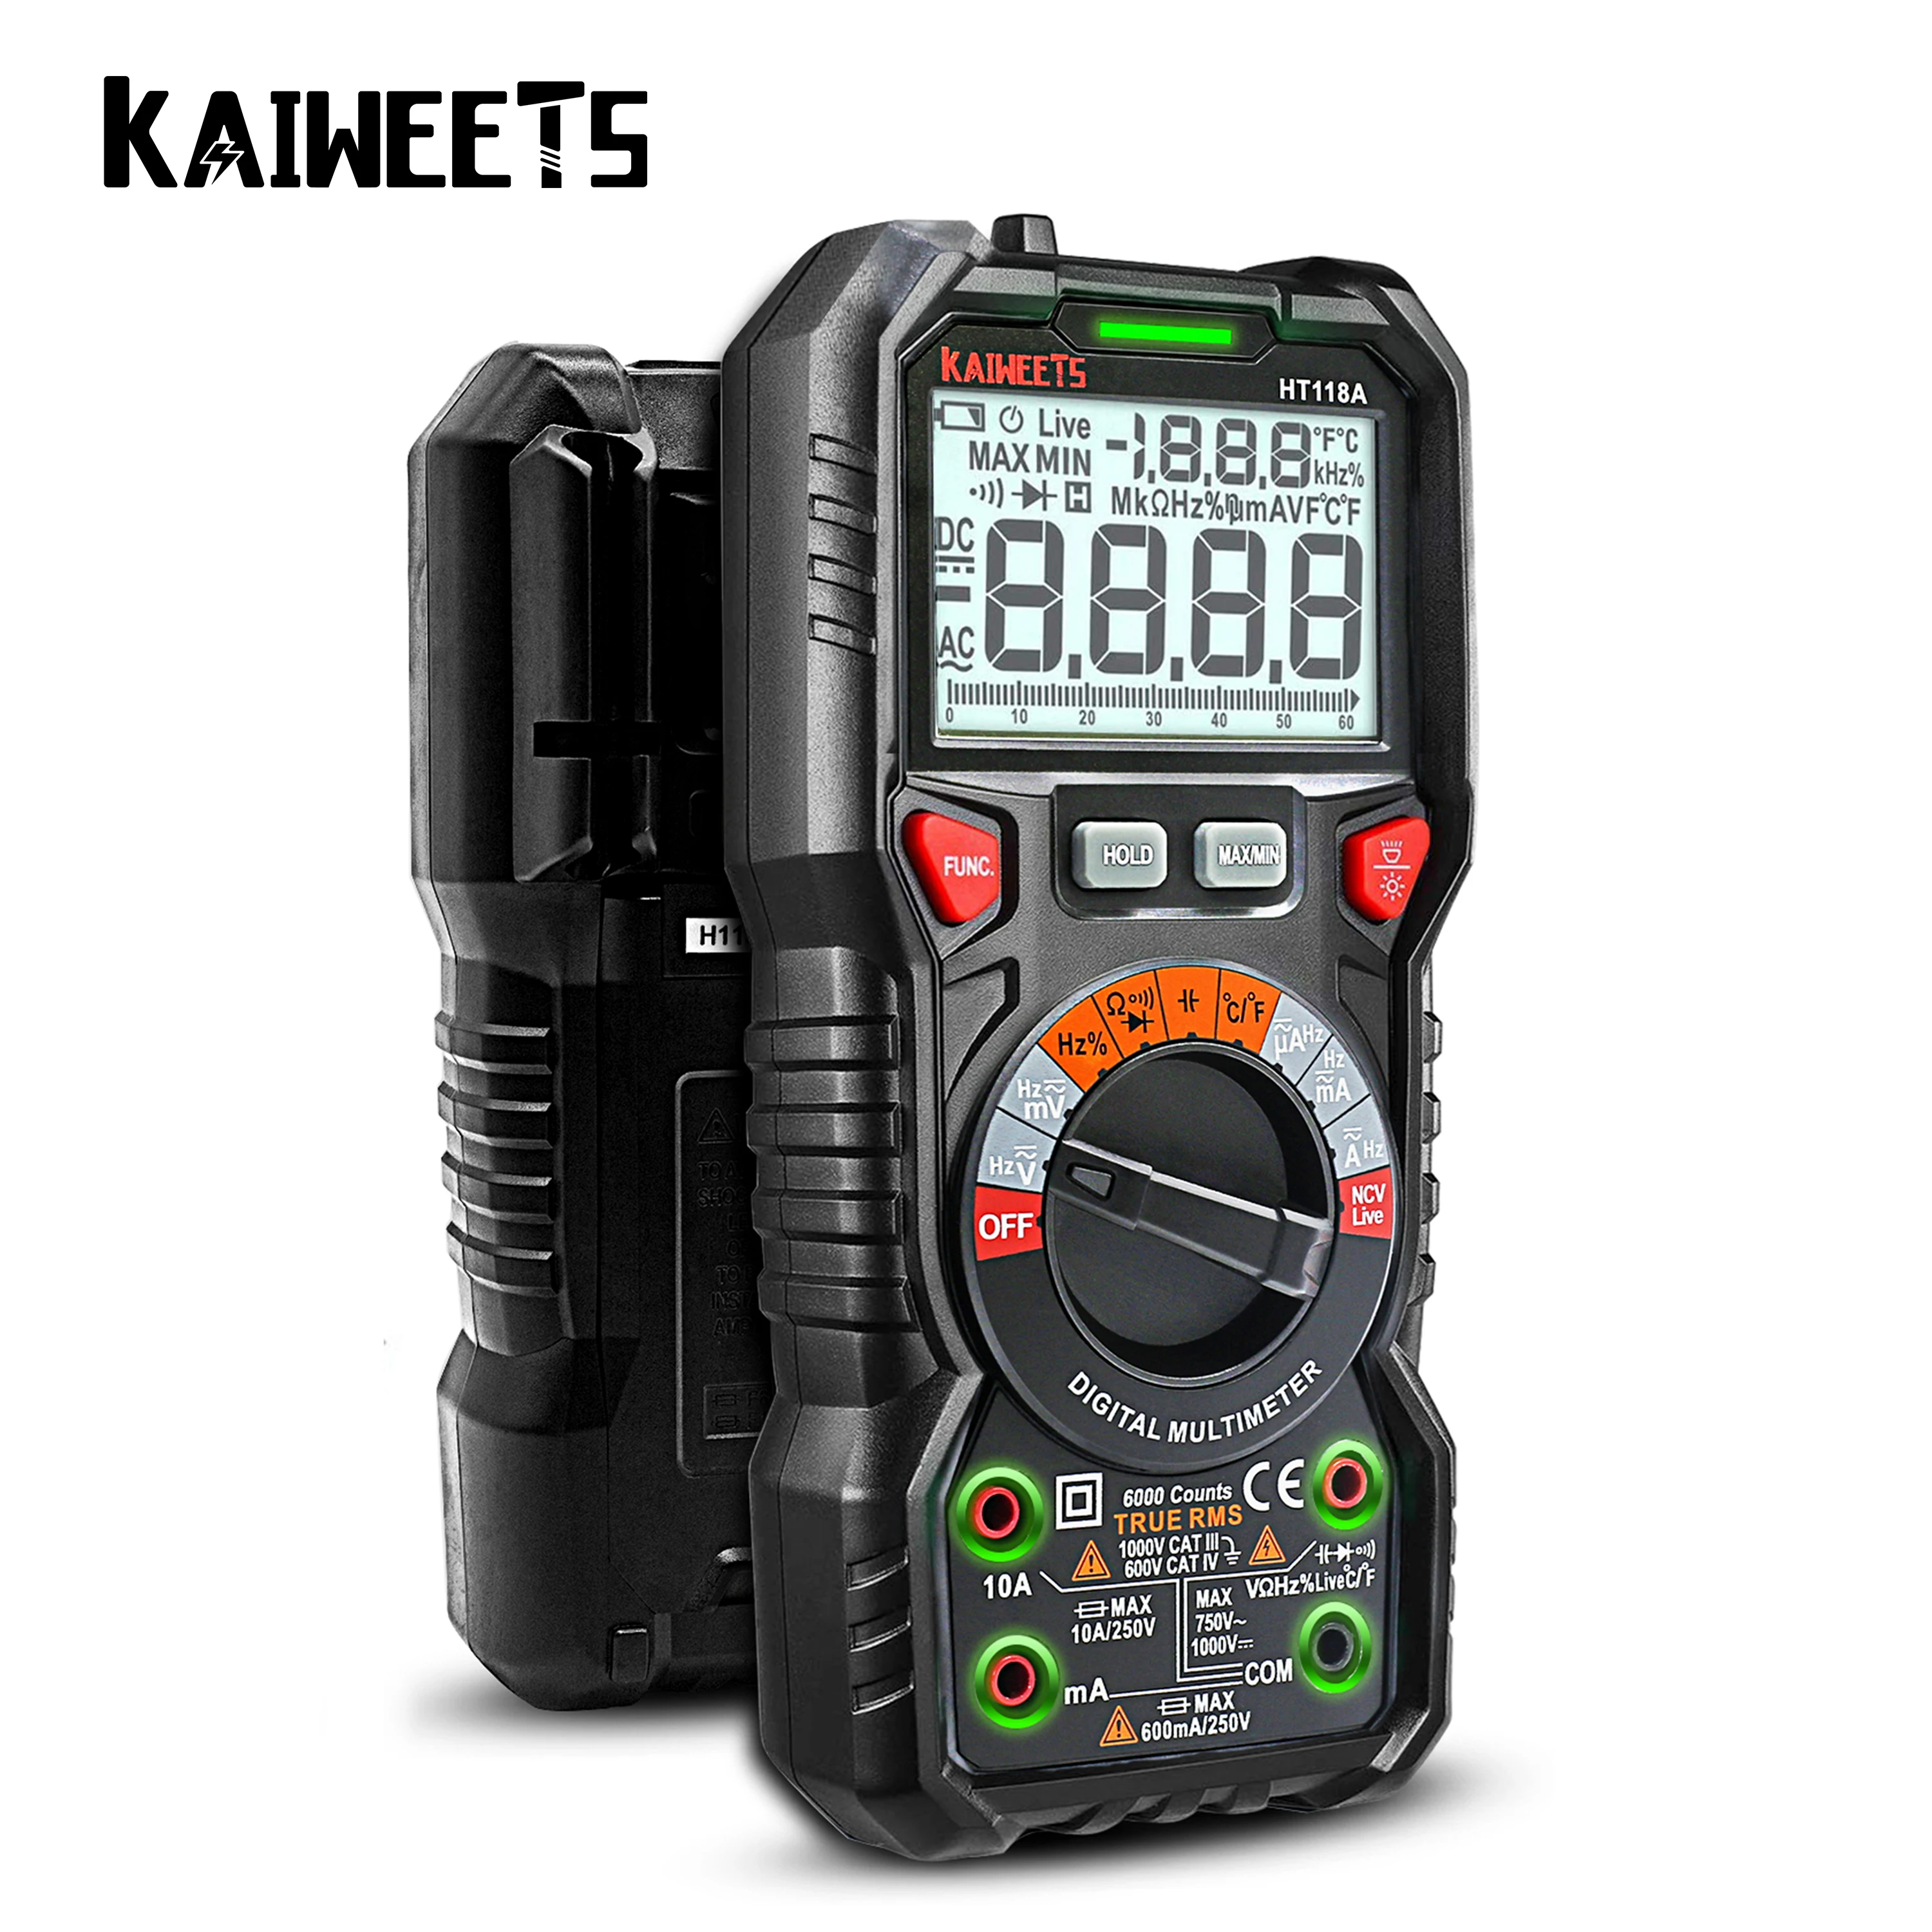 kaiweets ht118a